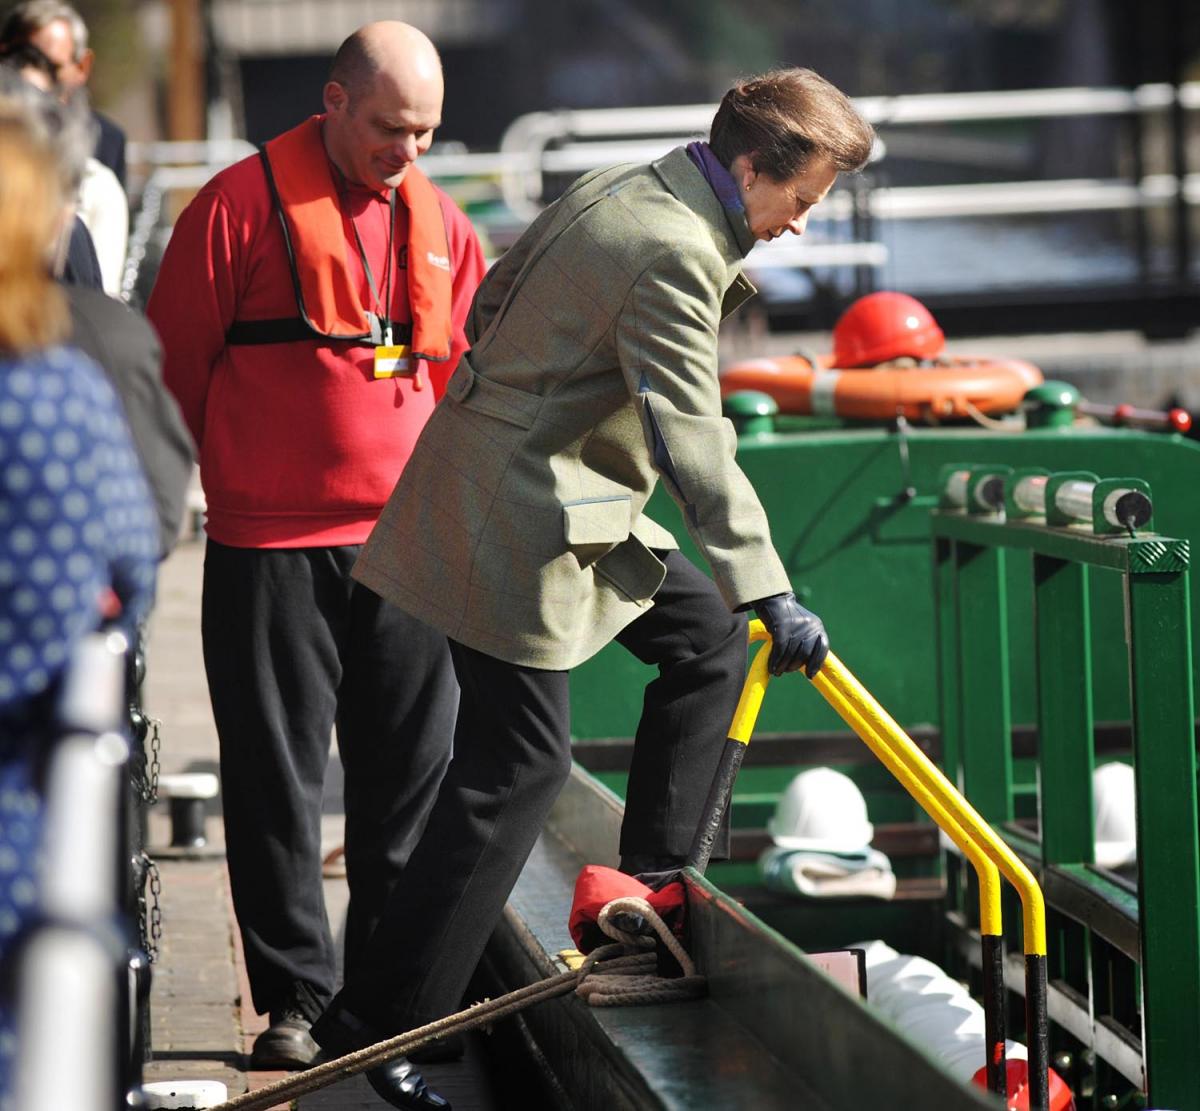 Princess Anne boarding the narrowboat